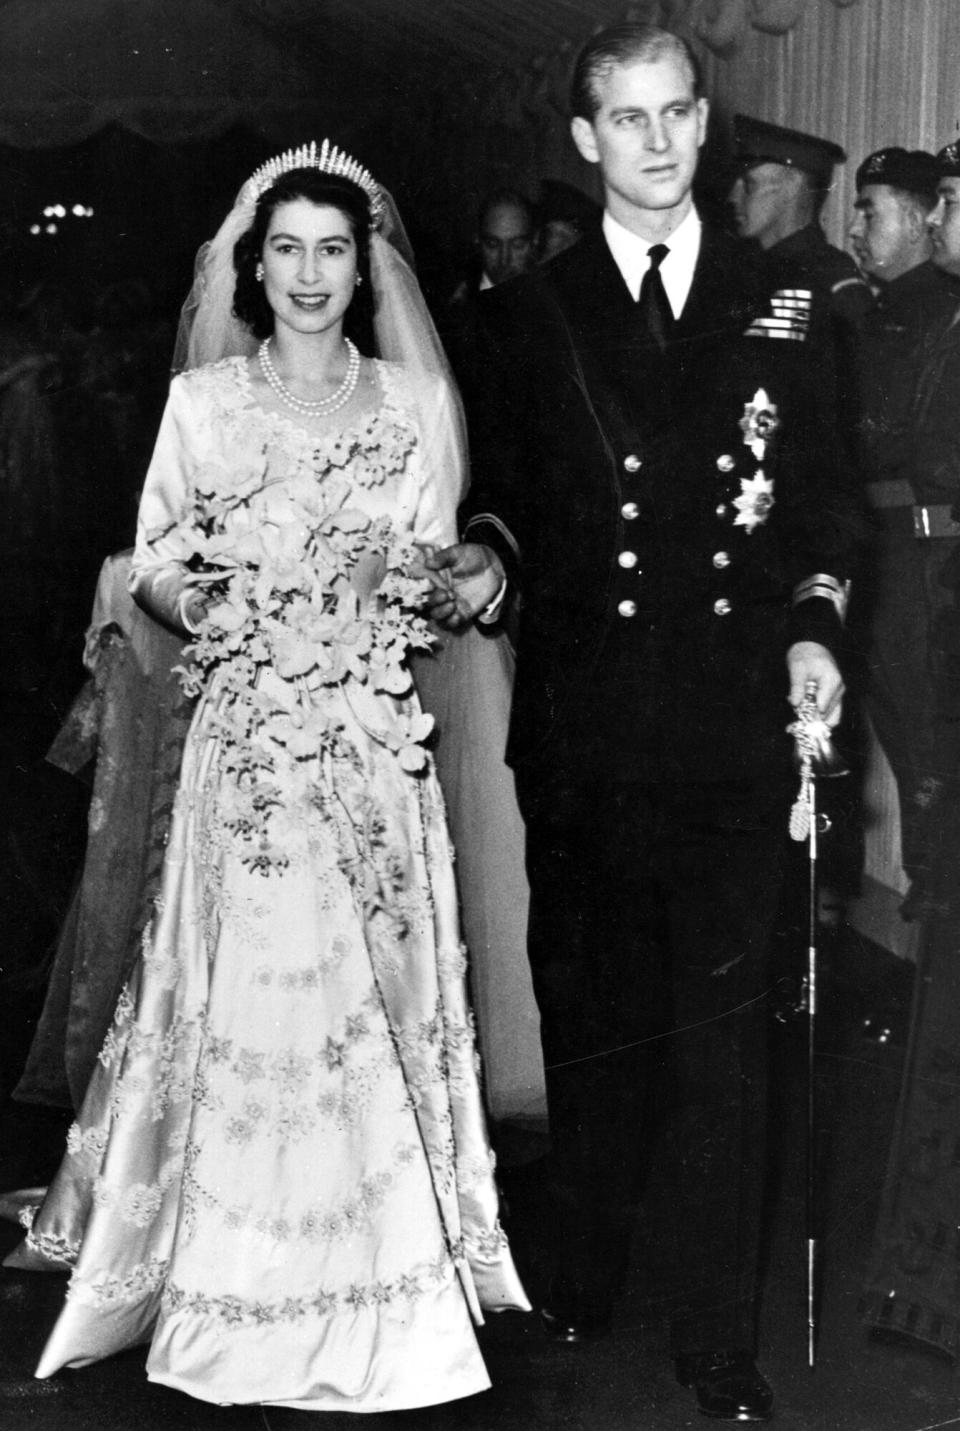 Queen Elizabeth II, as Princess Elizabeth, and her husband the Duke of Edinburgh, styled Prince Philip in 1957, on their wedding day. She became queen on her father King George VI's death in 1952